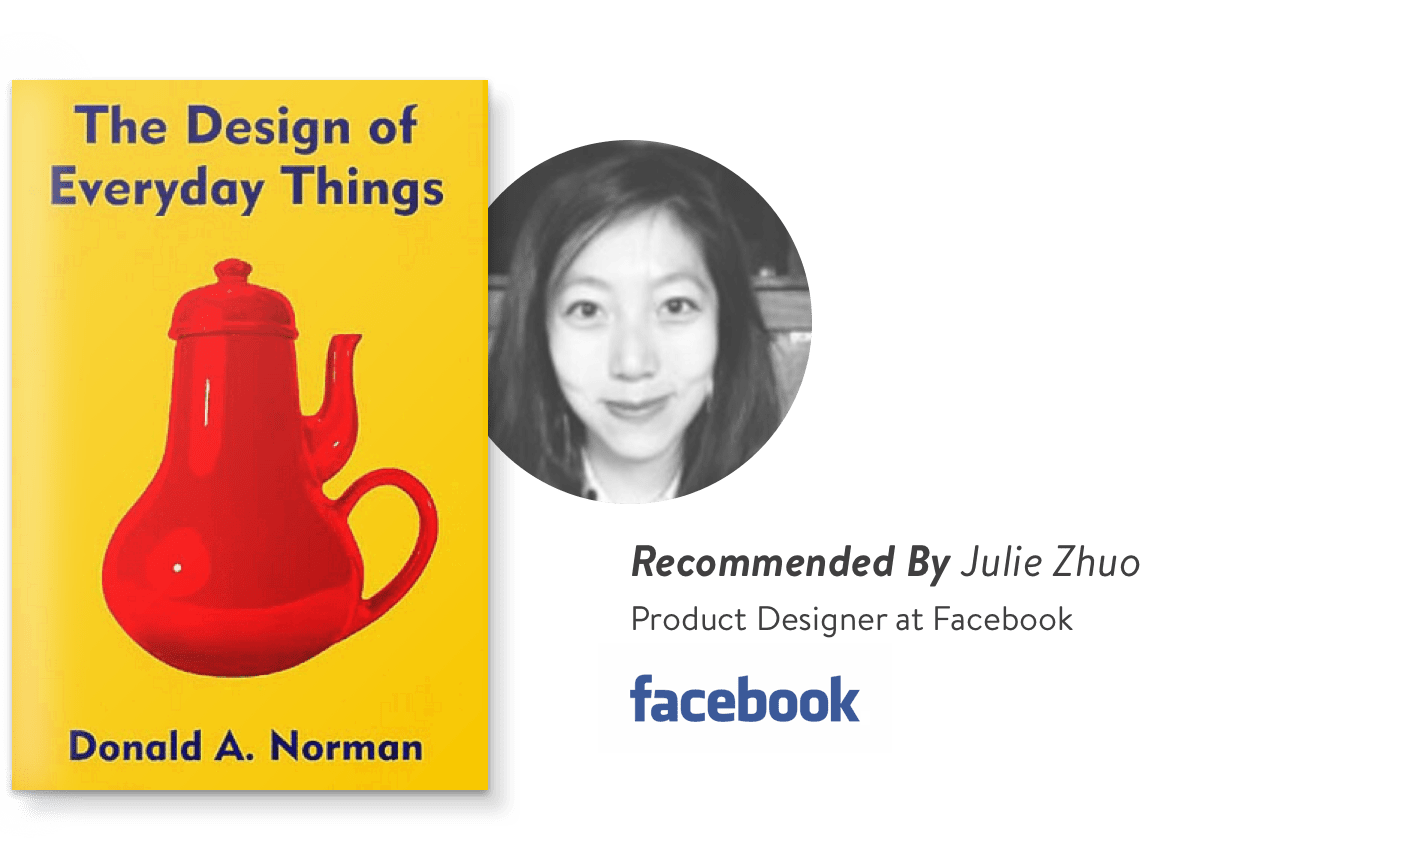 Julie Zhuo, Product Design at Facebook